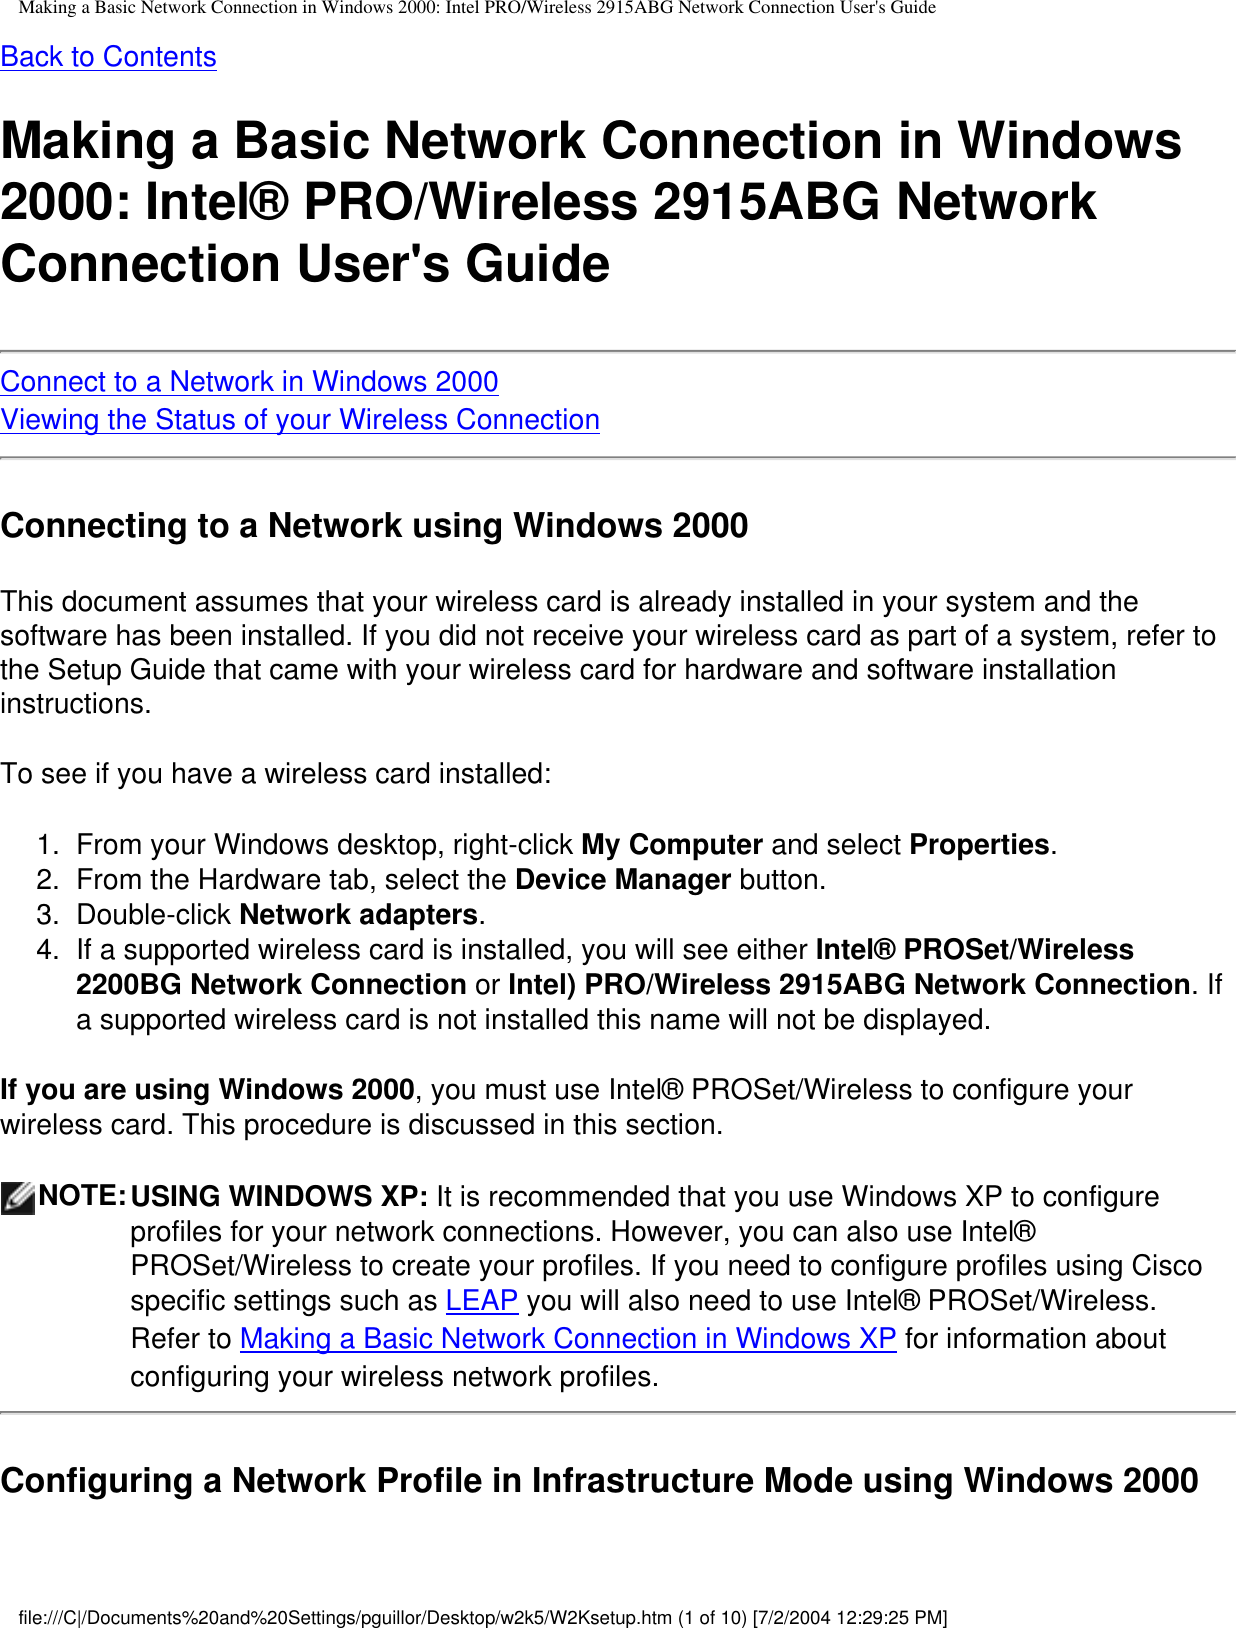 Making a Basic Network Connection in Windows 2000: Intel PRO/Wireless 2915ABG Network Connection User&apos;s GuideBack to ContentsMaking a Basic Network Connection in Windows 2000: Intel® PRO/Wireless 2915ABG Network Connection User&apos;s GuideConnect to a Network in Windows 2000Viewing the Status of your Wireless ConnectionConnecting to a Network using Windows 2000This document assumes that your wireless card is already installed in your system and the software has been installed. If you did not receive your wireless card as part of a system, refer to the Setup Guide that came with your wireless card for hardware and software installation instructions. To see if you have a wireless card installed:1.  From your Windows desktop, right-click My Computer and select Properties. 2.  From the Hardware tab, select the Device Manager button. 3.  Double-click Network adapters. 4.  If a supported wireless card is installed, you will see either Intel® PROSet/Wireless 2200BG Network Connection or Intel) PRO/Wireless 2915ABG Network Connection. If a supported wireless card is not installed this name will not be displayed.  If you are using Windows 2000, you must use Intel® PROSet/Wireless to configure your wireless card. This procedure is discussed in this section.NOTE:USING WINDOWS XP: It is recommended that you use Windows XP to configure profiles for your network connections. However, you can also use Intel® PROSet/Wireless to create your profiles. If you need to configure profiles using Cisco specific settings such as LEAP you will also need to use Intel® PROSet/Wireless.  Refer to Making a Basic Network Connection in Windows XP for information about configuring your wireless network profiles.Configuring a Network Profile in Infrastructure Mode using Windows 2000file:///C|/Documents%20and%20Settings/pguillor/Desktop/w2k5/W2Ksetup.htm (1 of 10) [7/2/2004 12:29:25 PM]